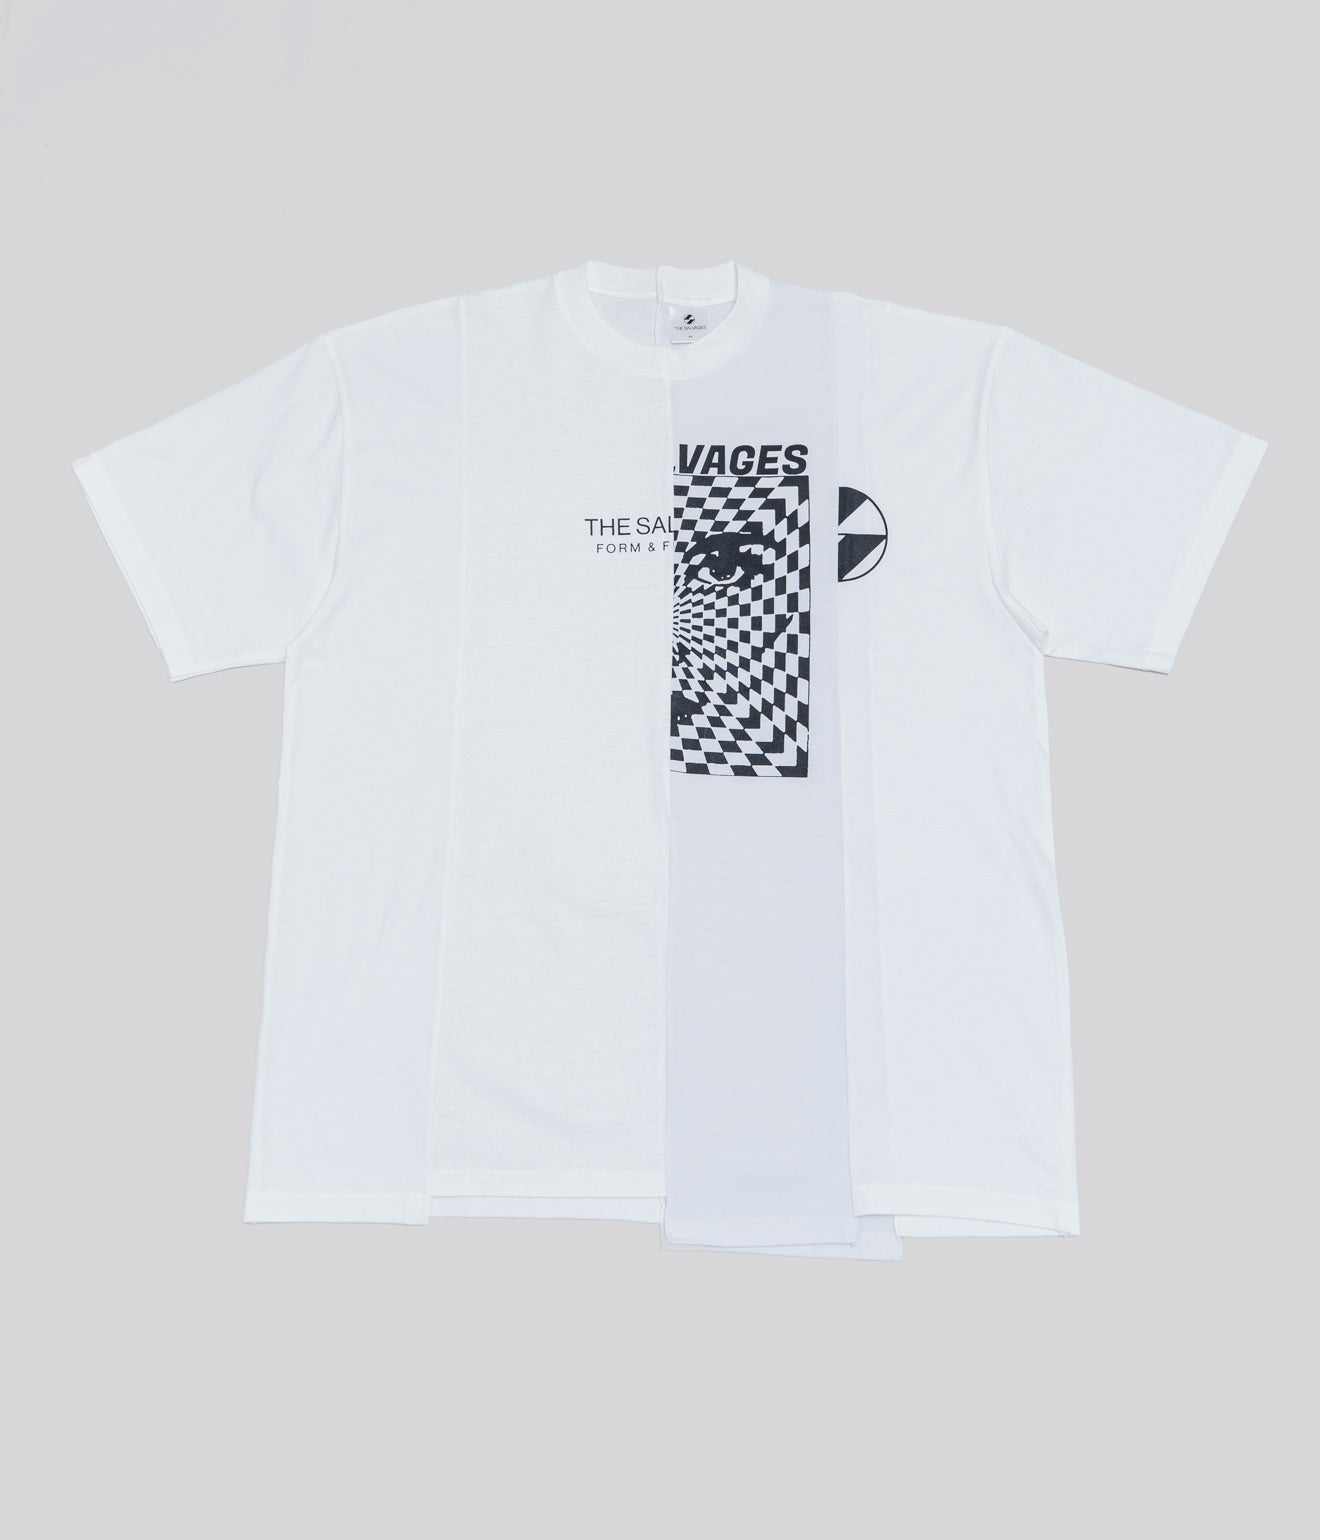 THE SALVAGES "SS23 RECONSTRUCTED T-SHIRT" White - WEAREALLANIMALS